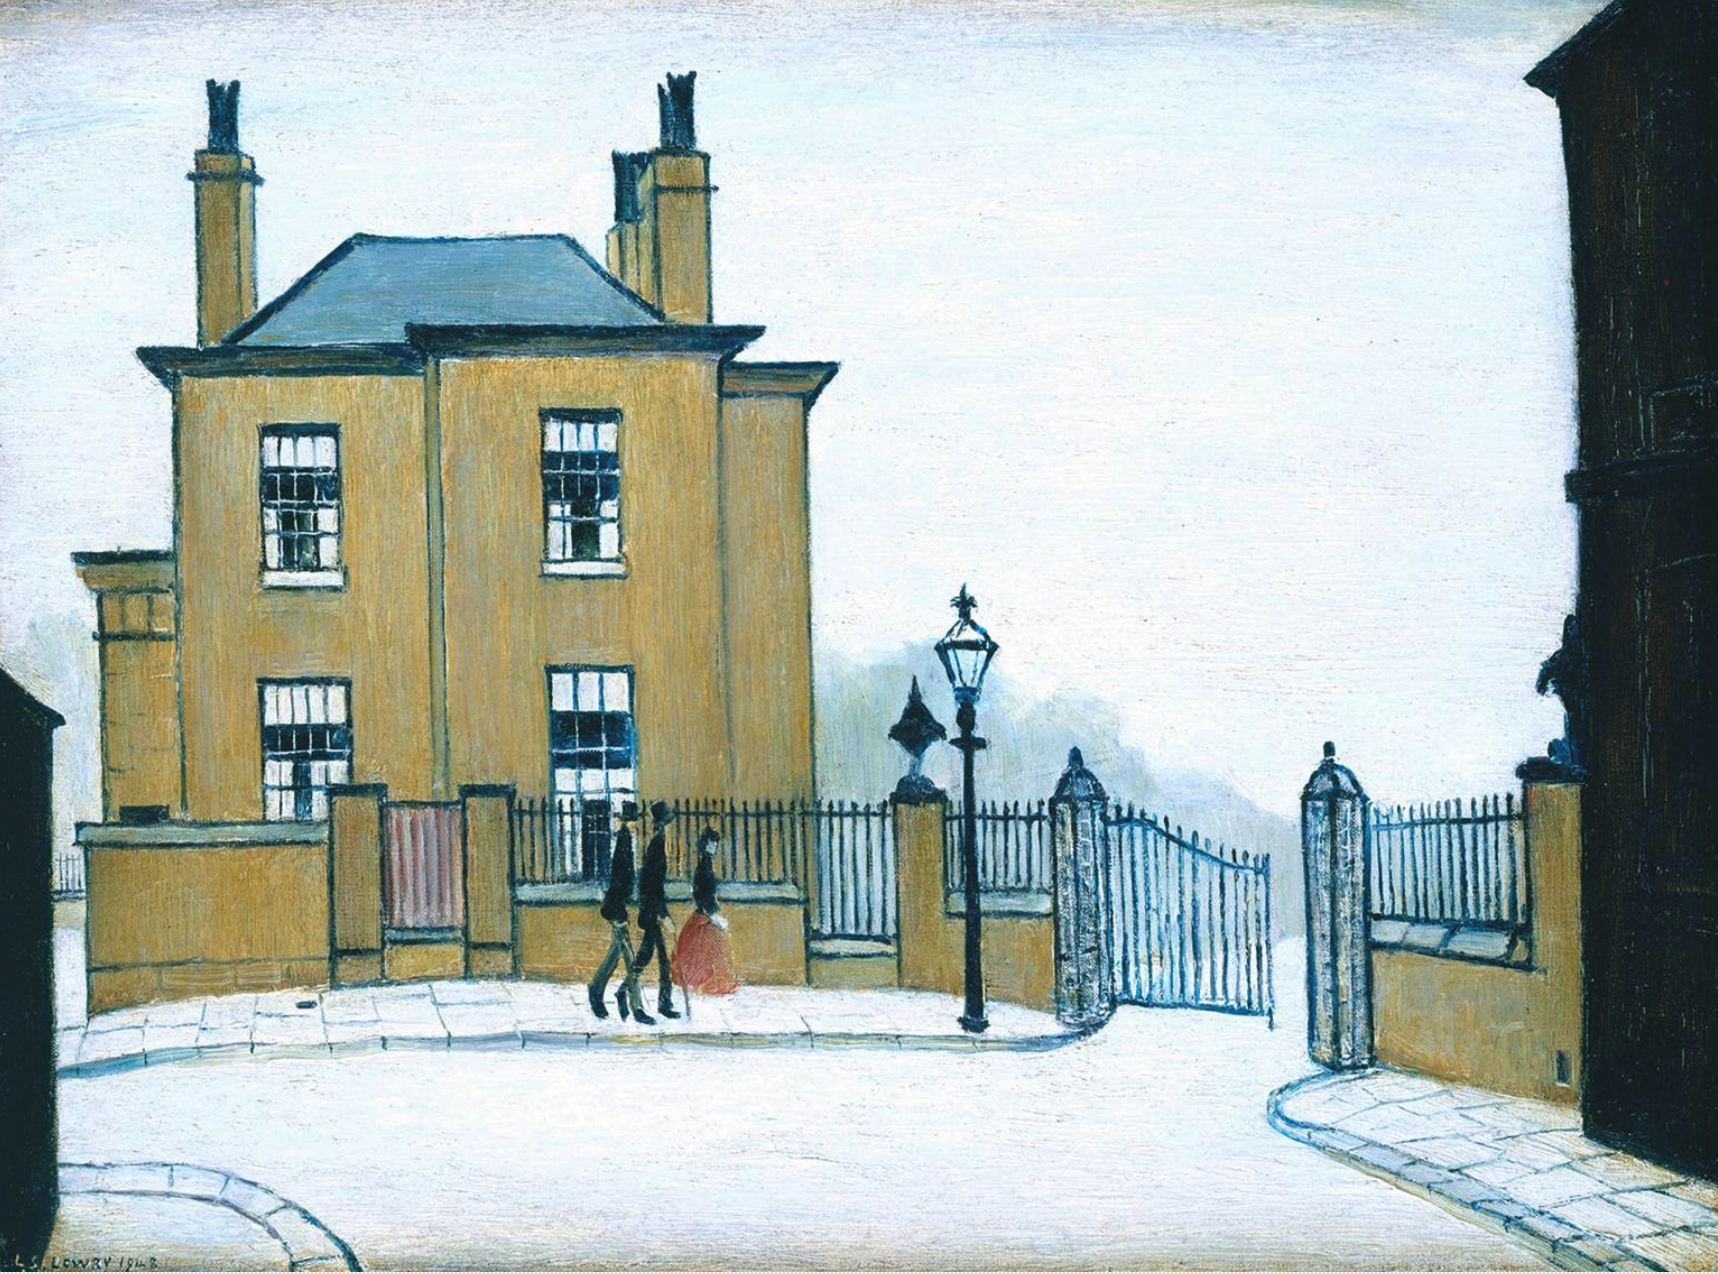 The Old House, Grove Street, Salford (1948) by Laurence Stephen Lowry (1887 - 1976), English artist.